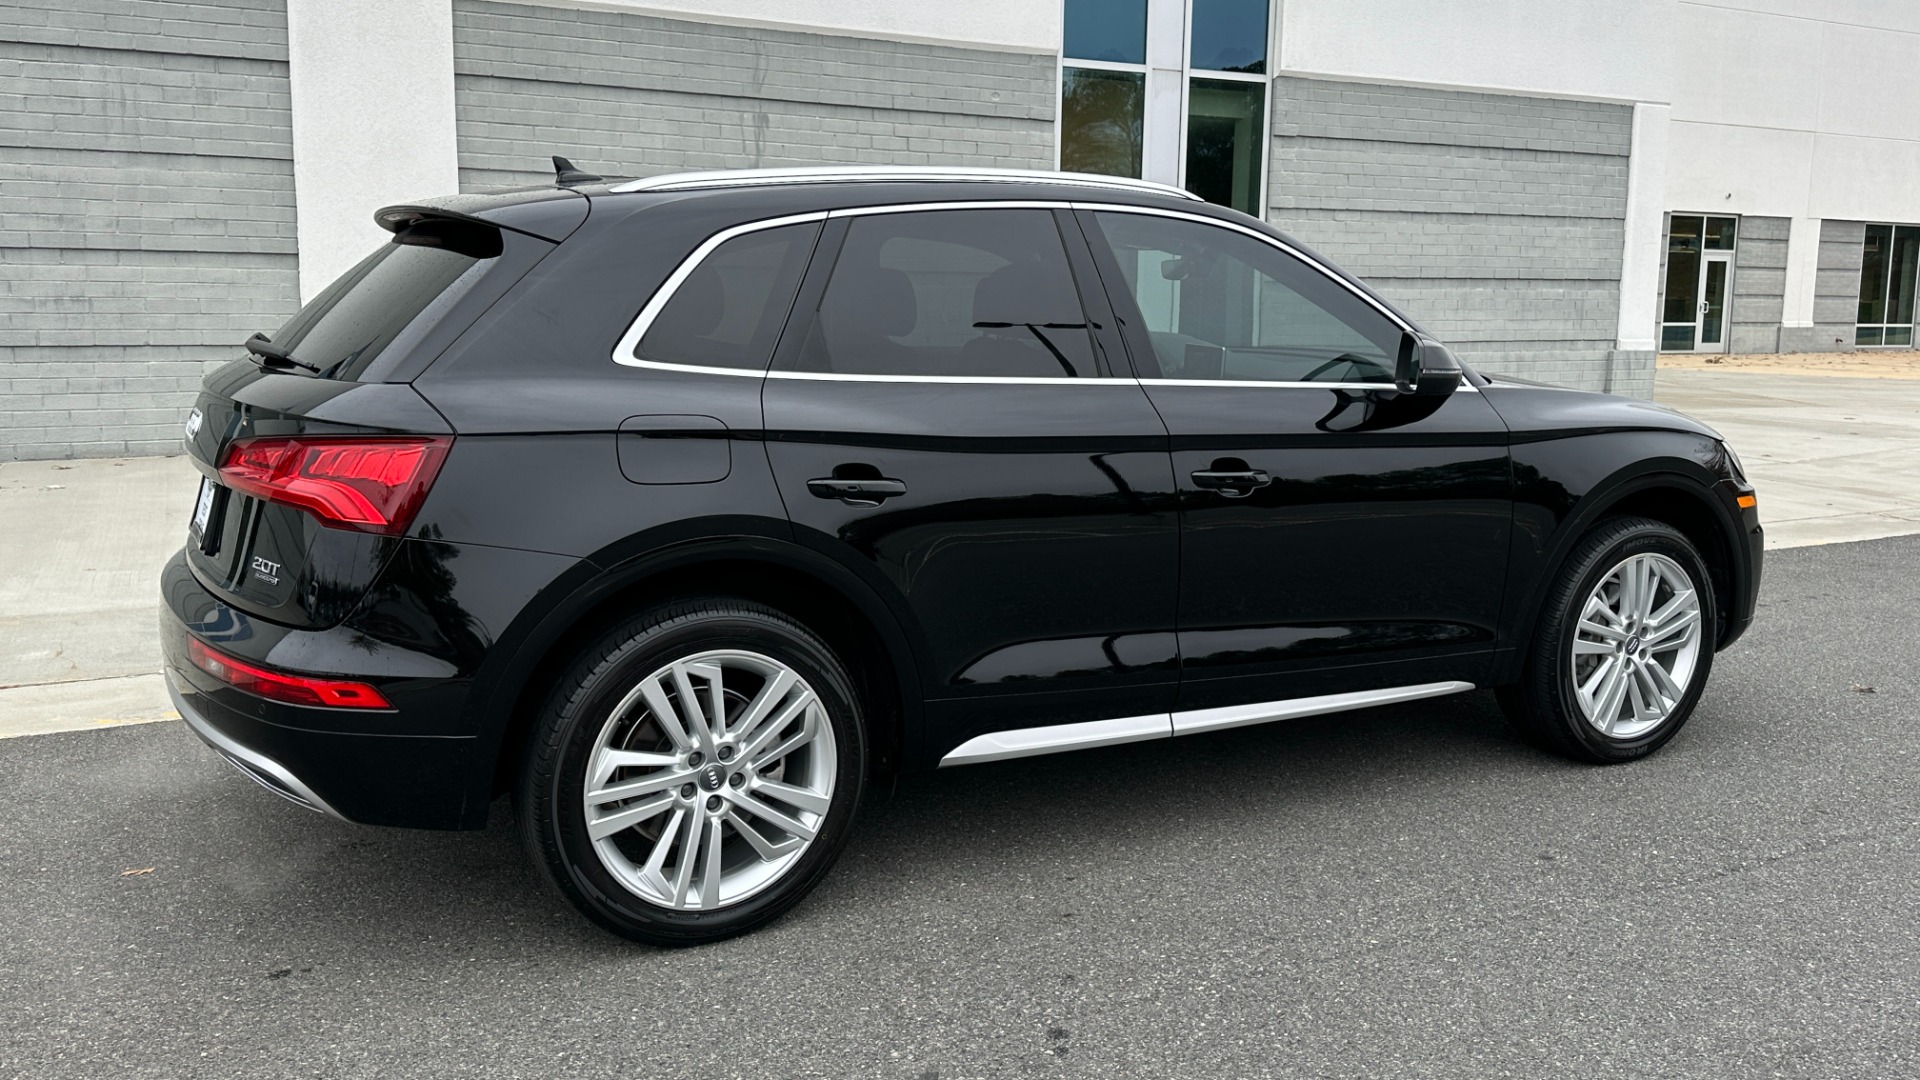 Used 2018 Audi Q5 PREMUM PLUS / NAV / 20IN WHEELS / COLD WEATHER / B AND O SOUND for sale $31,995 at Formula Imports in Charlotte NC 28227 7